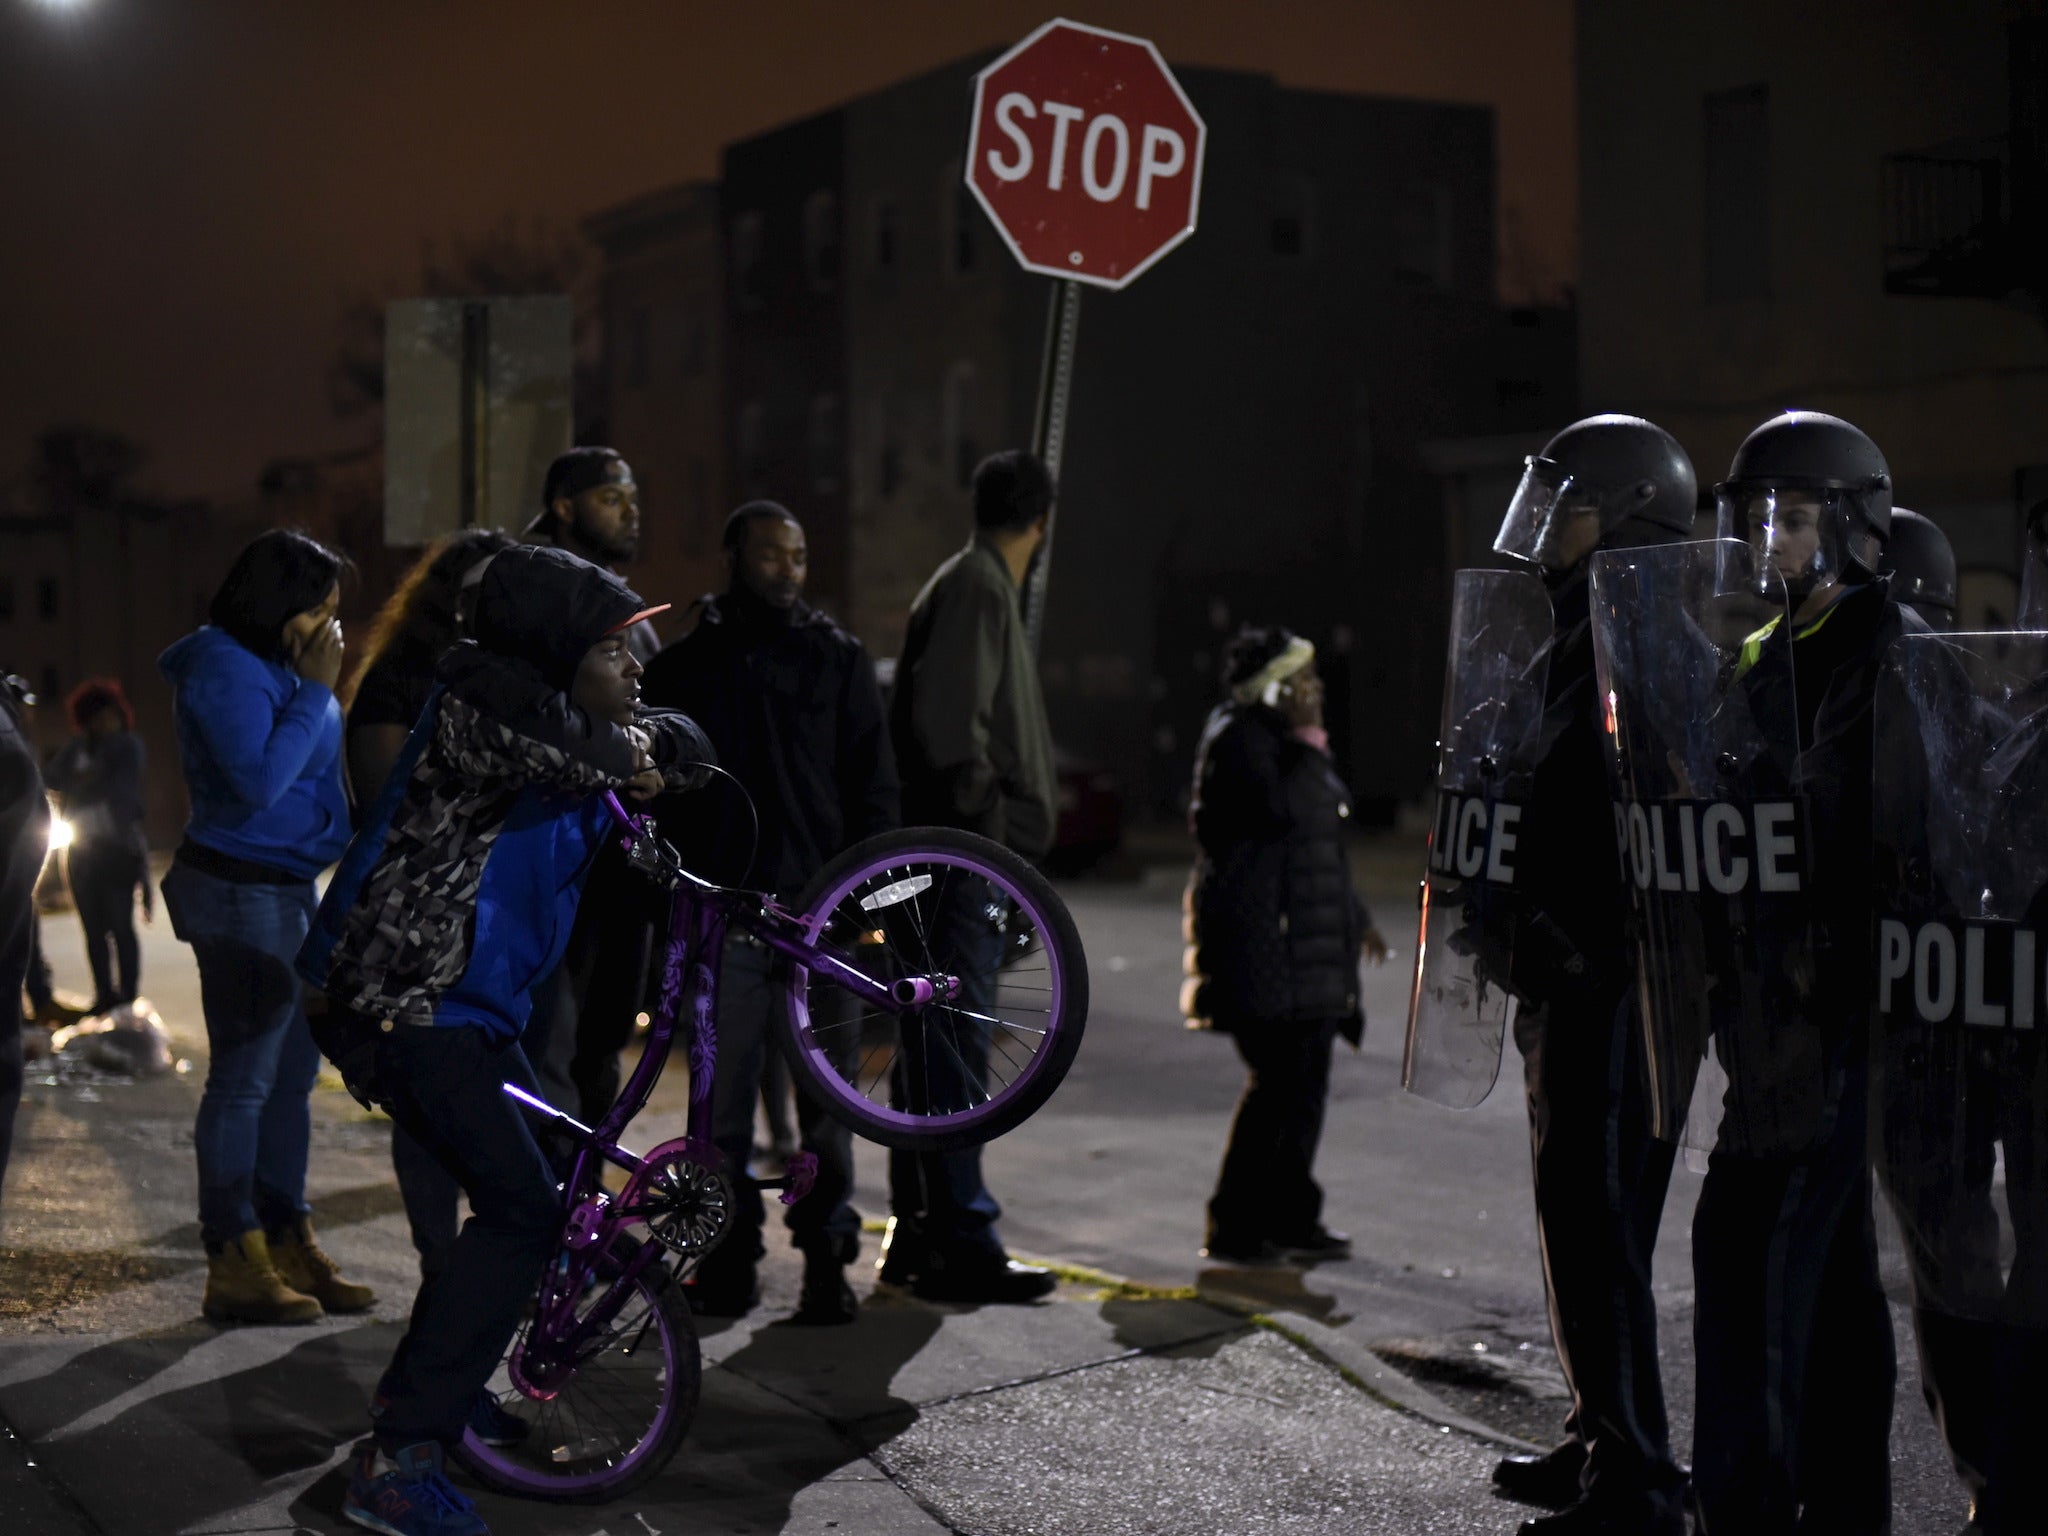 Police and protesters face off in Baltimore during unrest over the death in custody of Freddie Gray